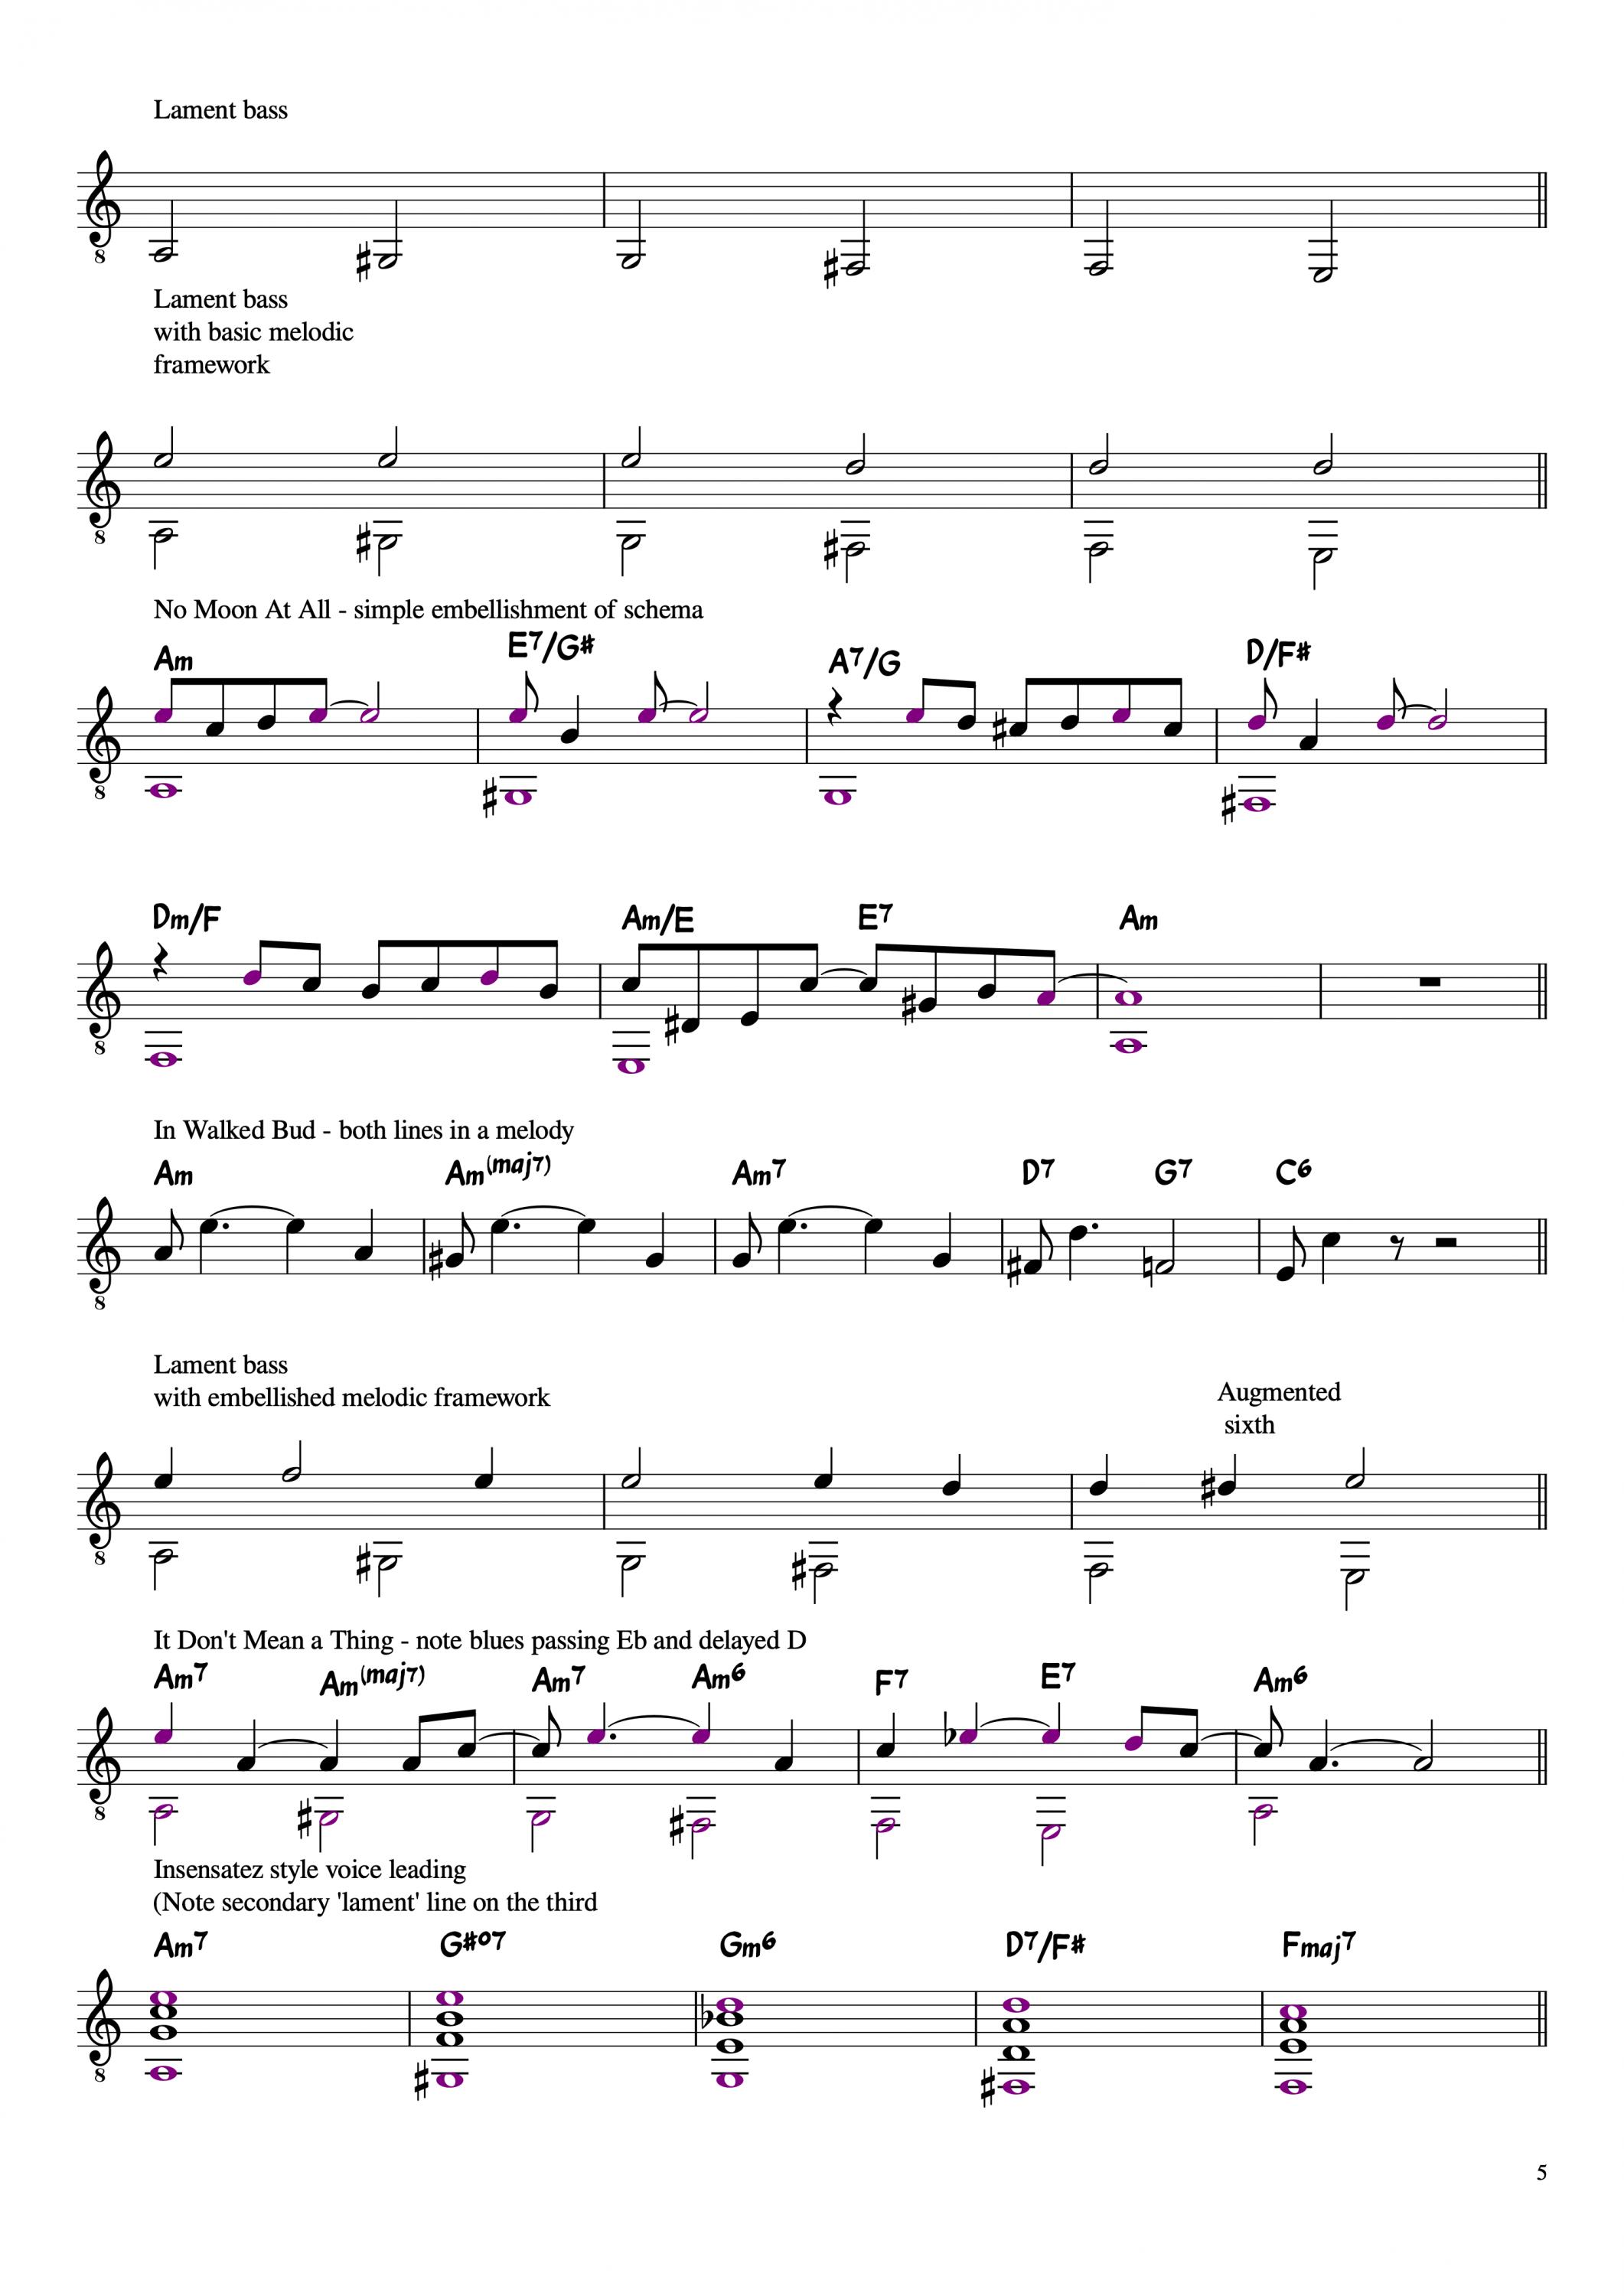 Classical schemata (counterpoint skeletons) in jazz - what I've been working on-schemata_for_jazz-png-5-jpg